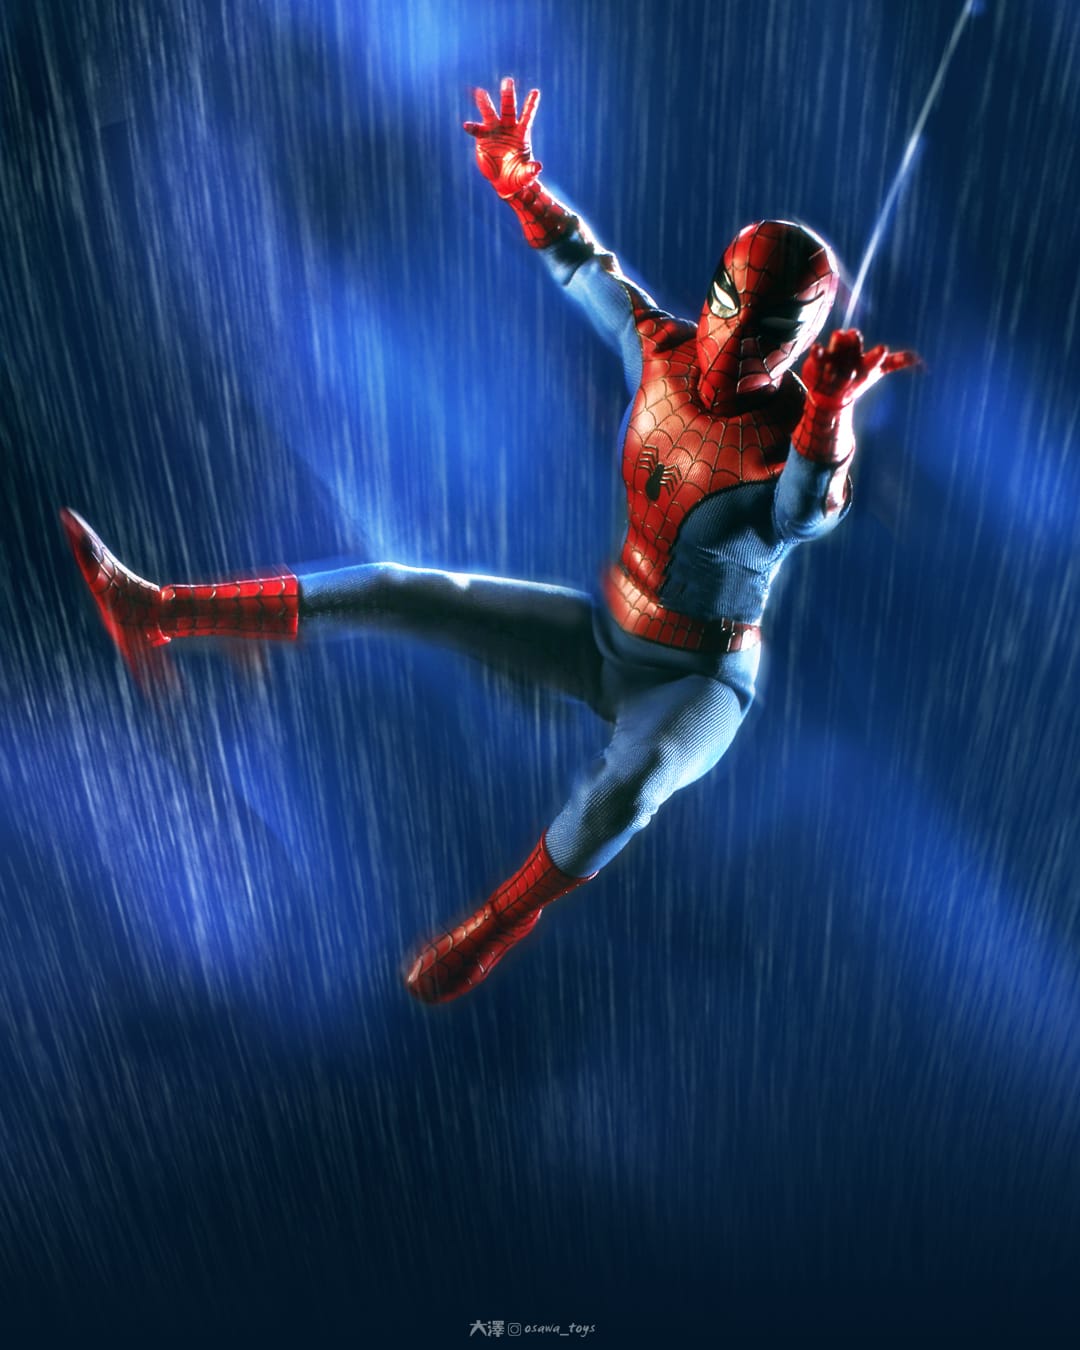 FAN FEATURE FRIDAY #167 - THE AMAZING SPIDER-MAN EDITION